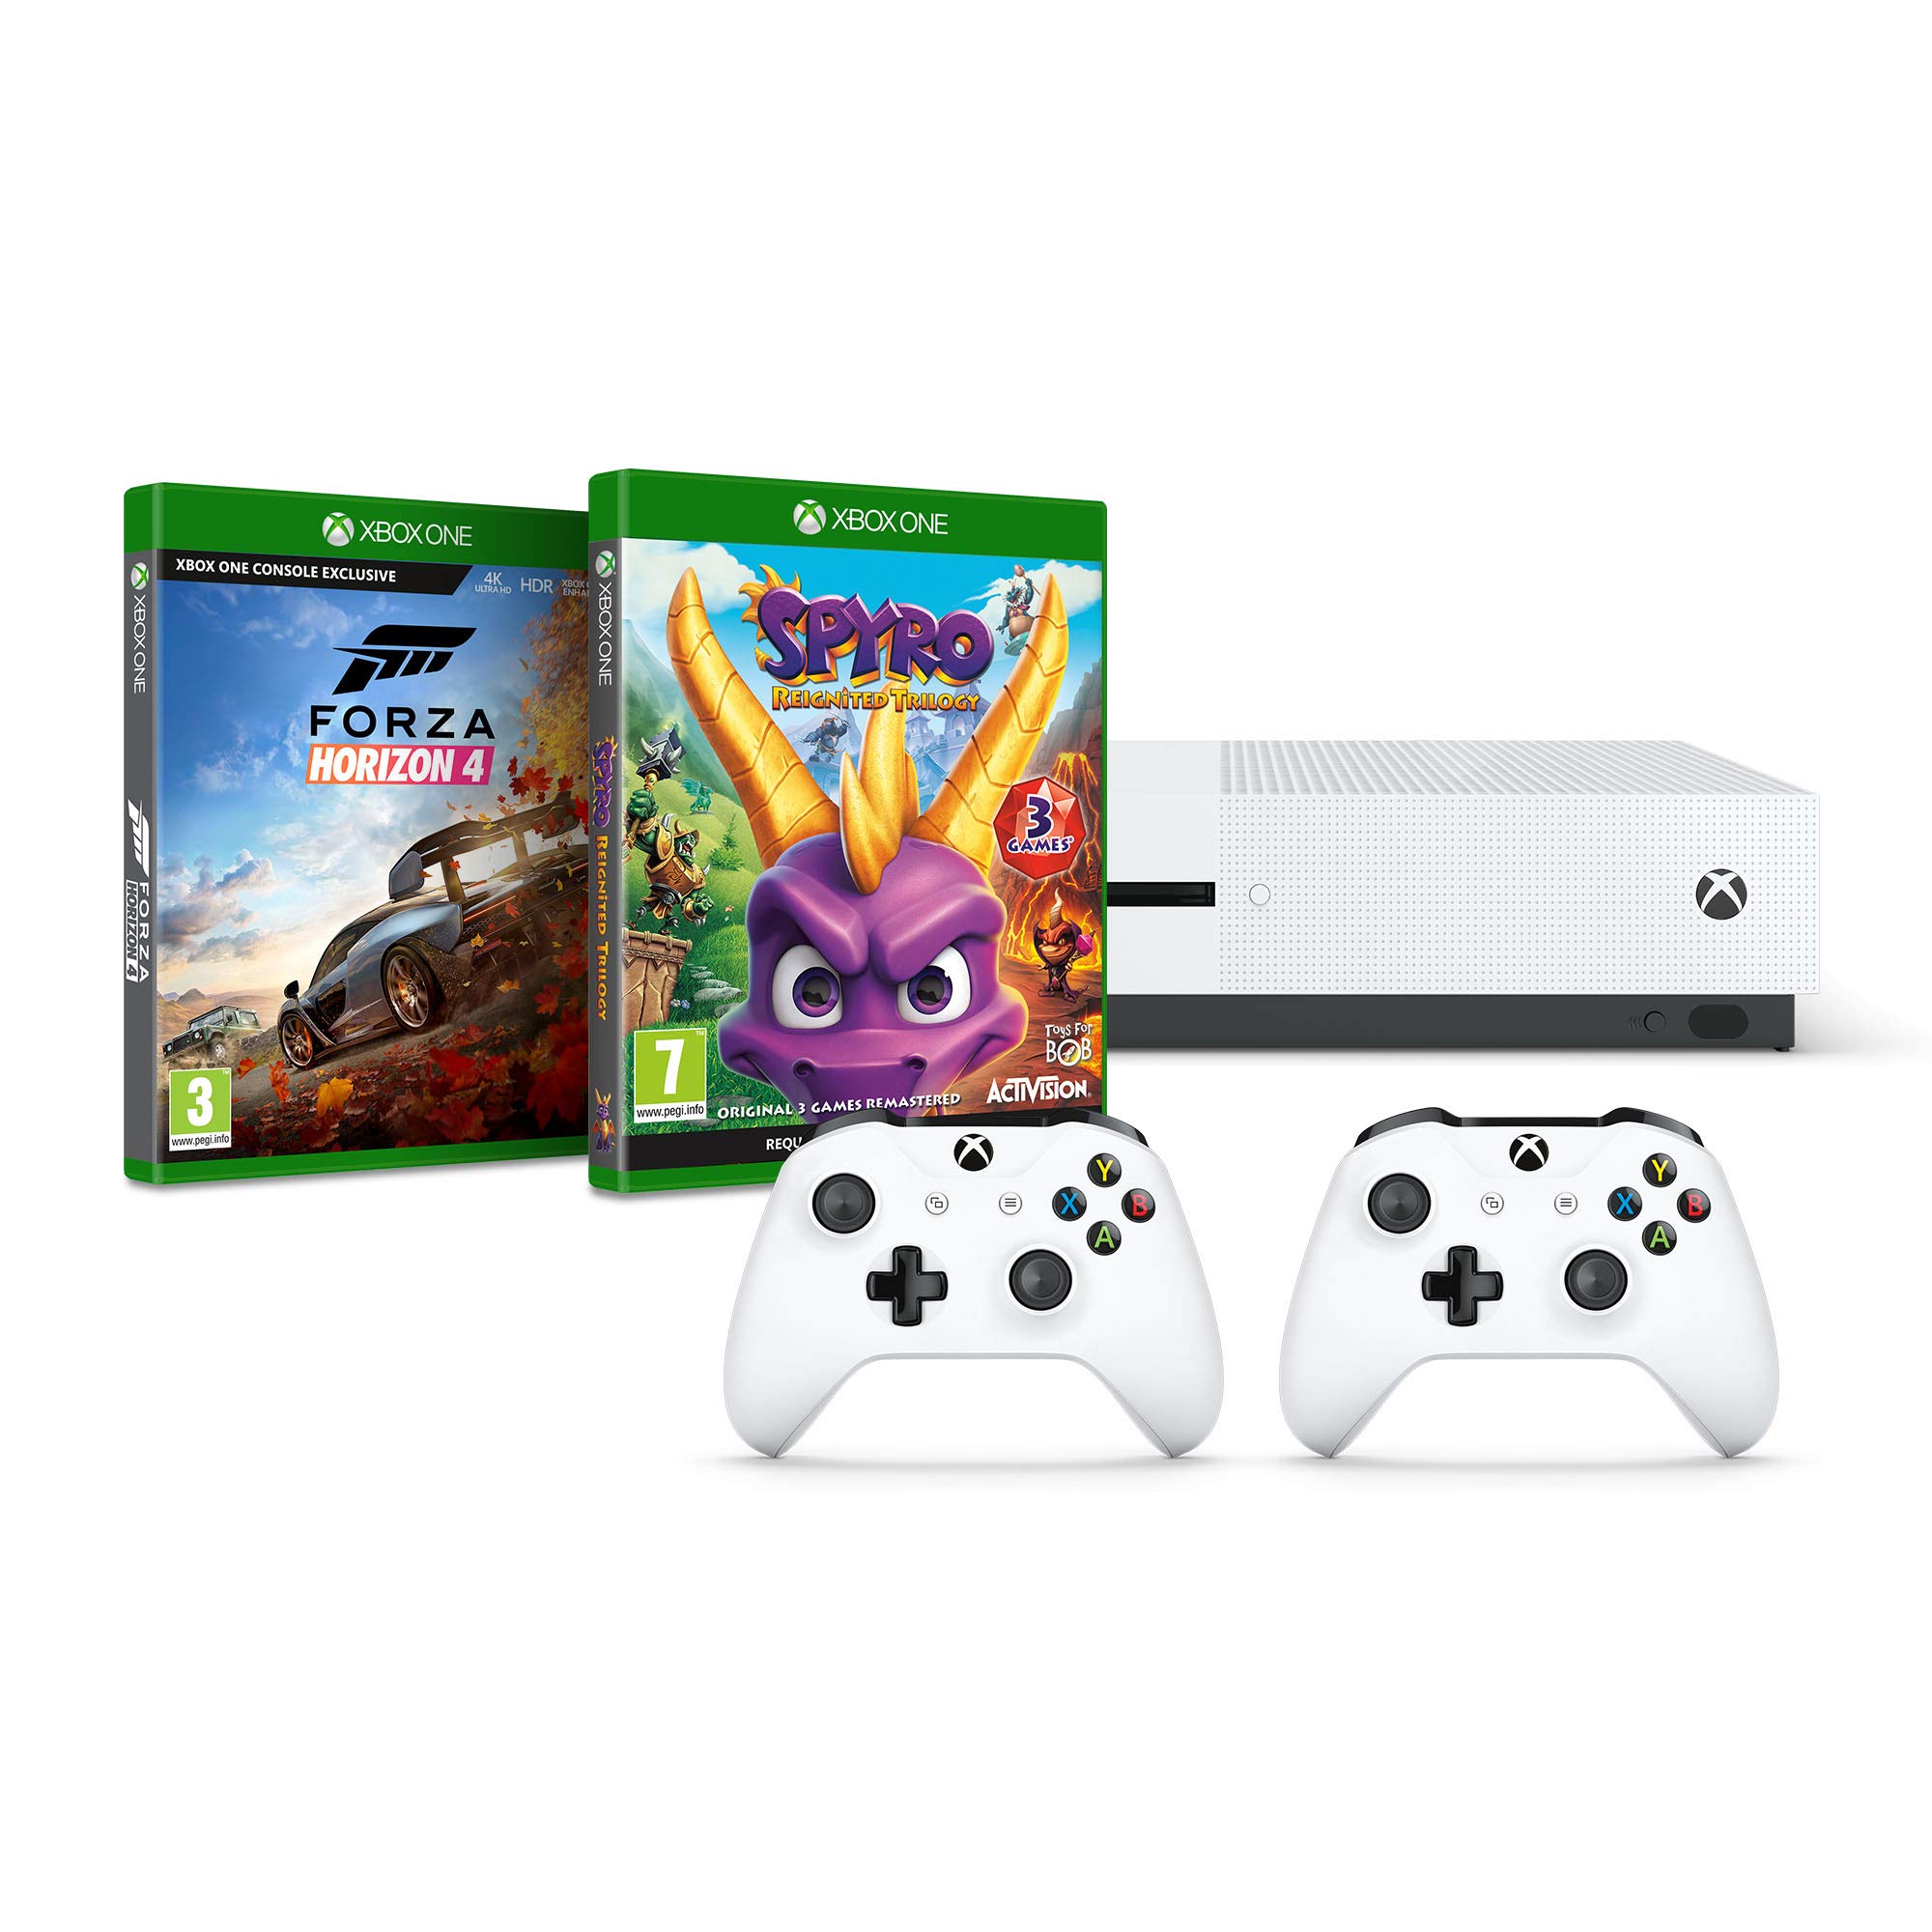 Xbox One S 1TB Two-Controller console + Forza Horizon 4 - Standard Edition + Spyro Trilogy Reignited (Xbox One)